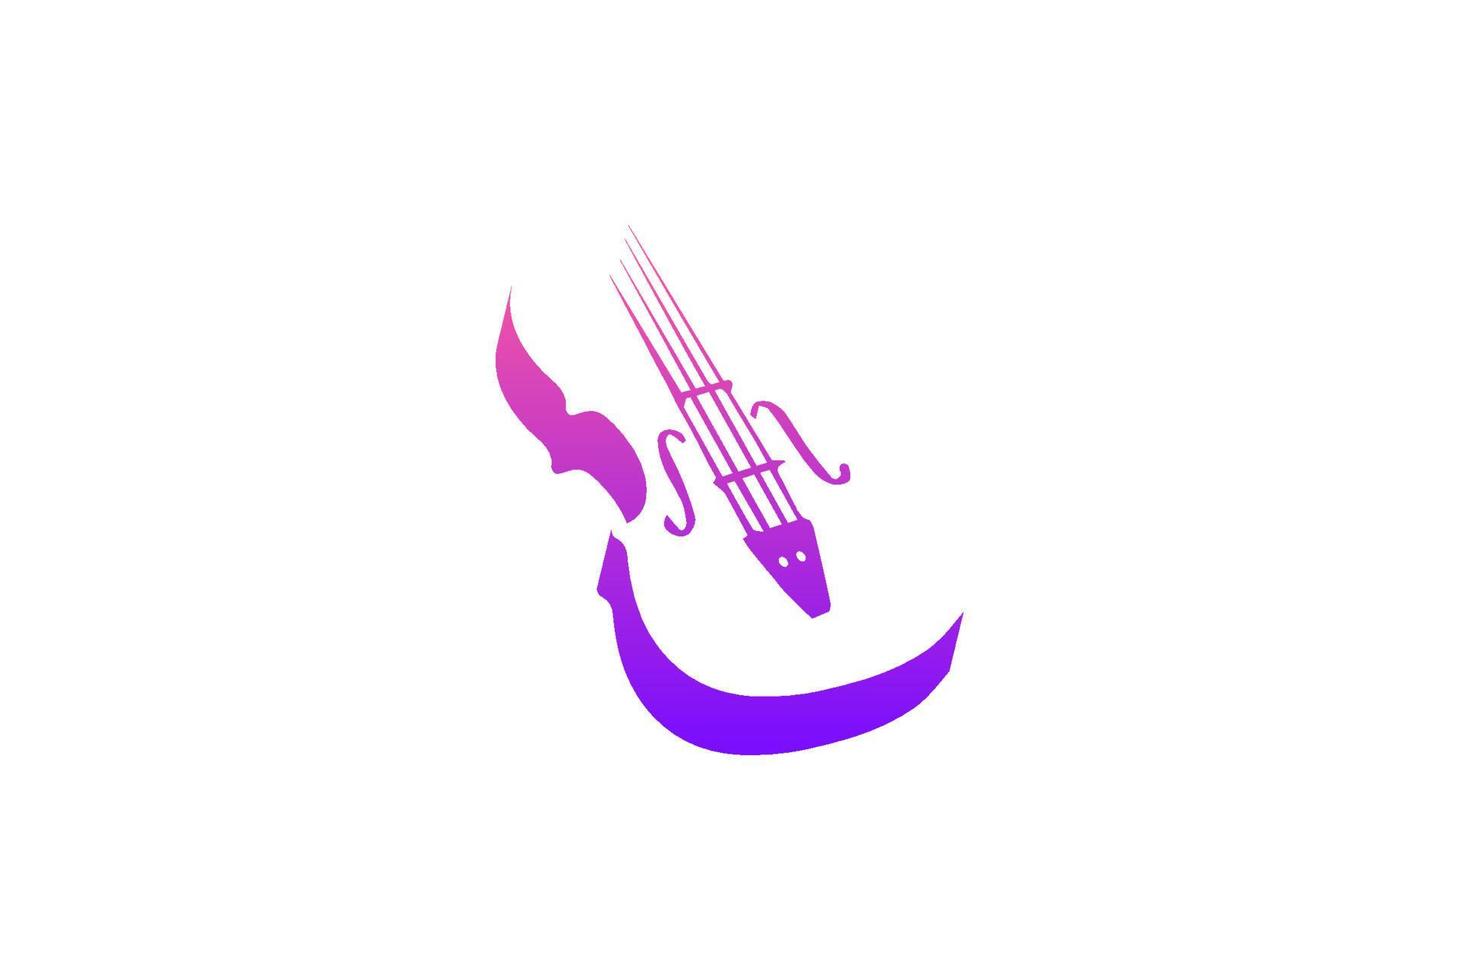 Simple Modern Violin Silhouette for Music Concert Show Competition Logo Design Vector